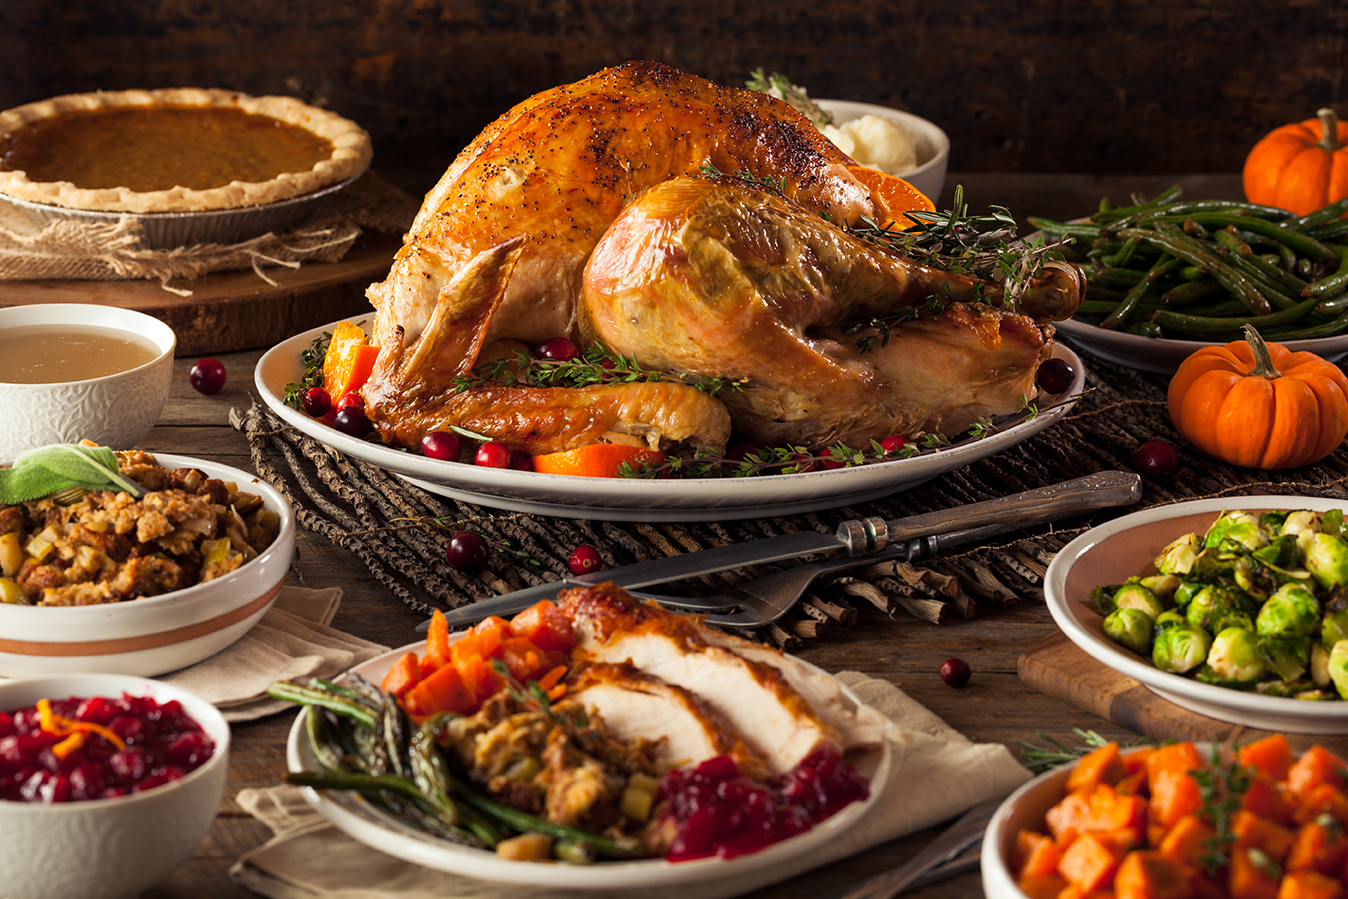 Preparing Your Holiday Turkey Safely